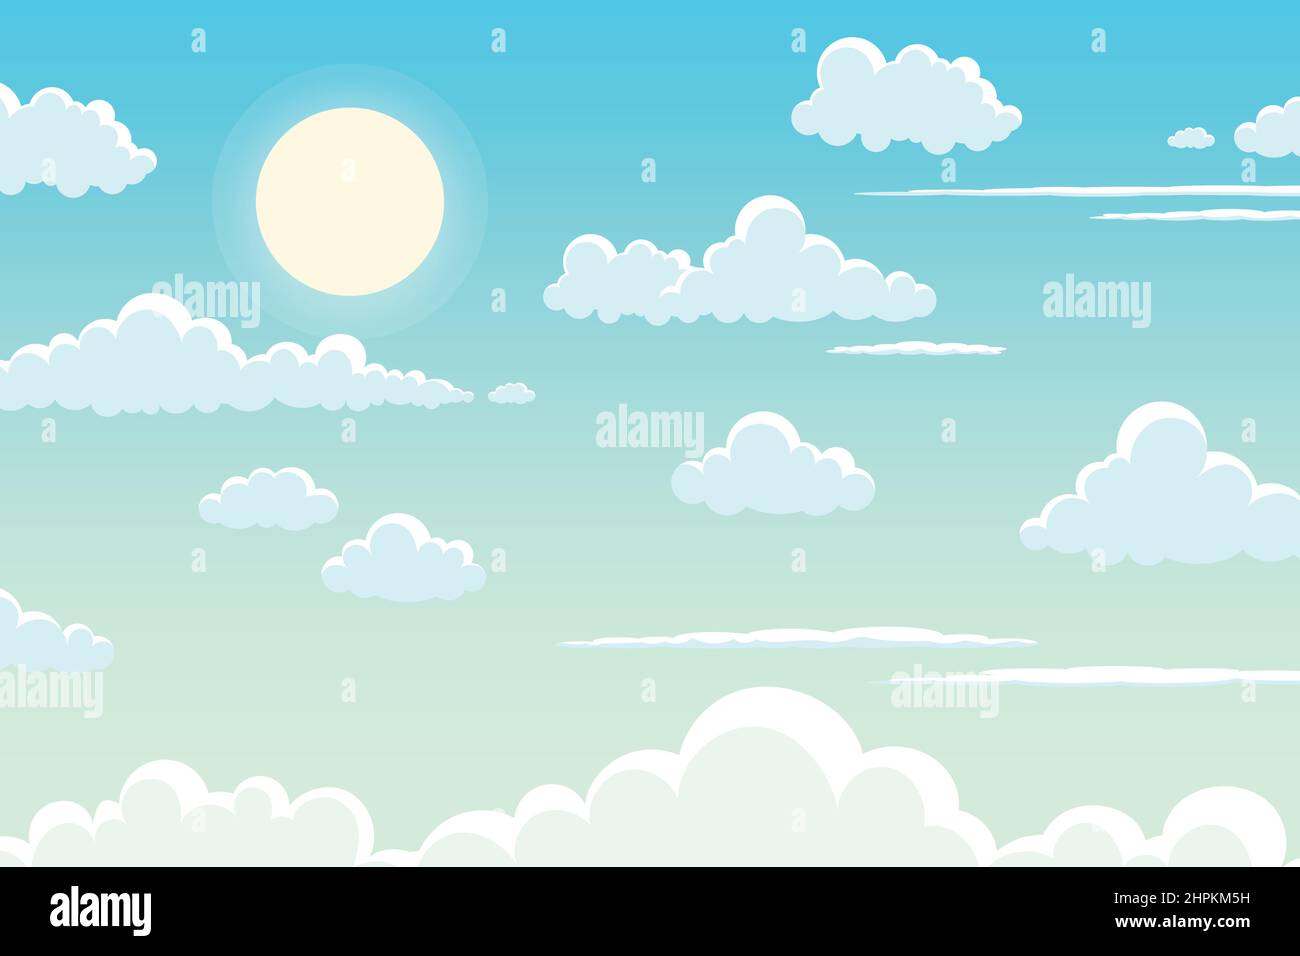 vector illustration of blue sky with bright white clouds on a sunny day for background Stock Vector